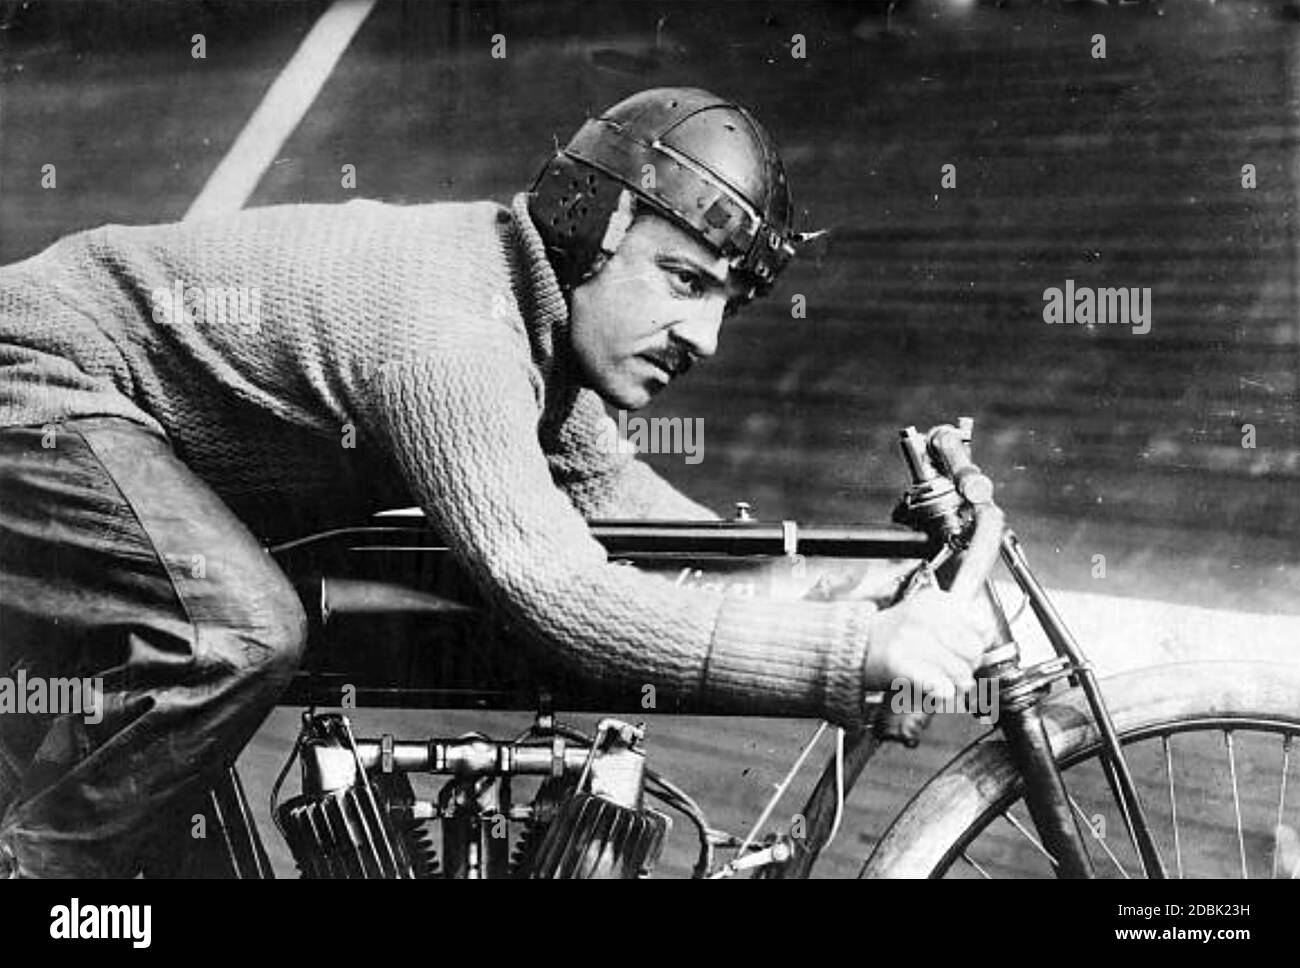 ANDRÉ GRAPPERON French motorcyclist on an Indian bike in 1913. Photo: Baines News Service. Stock Photo